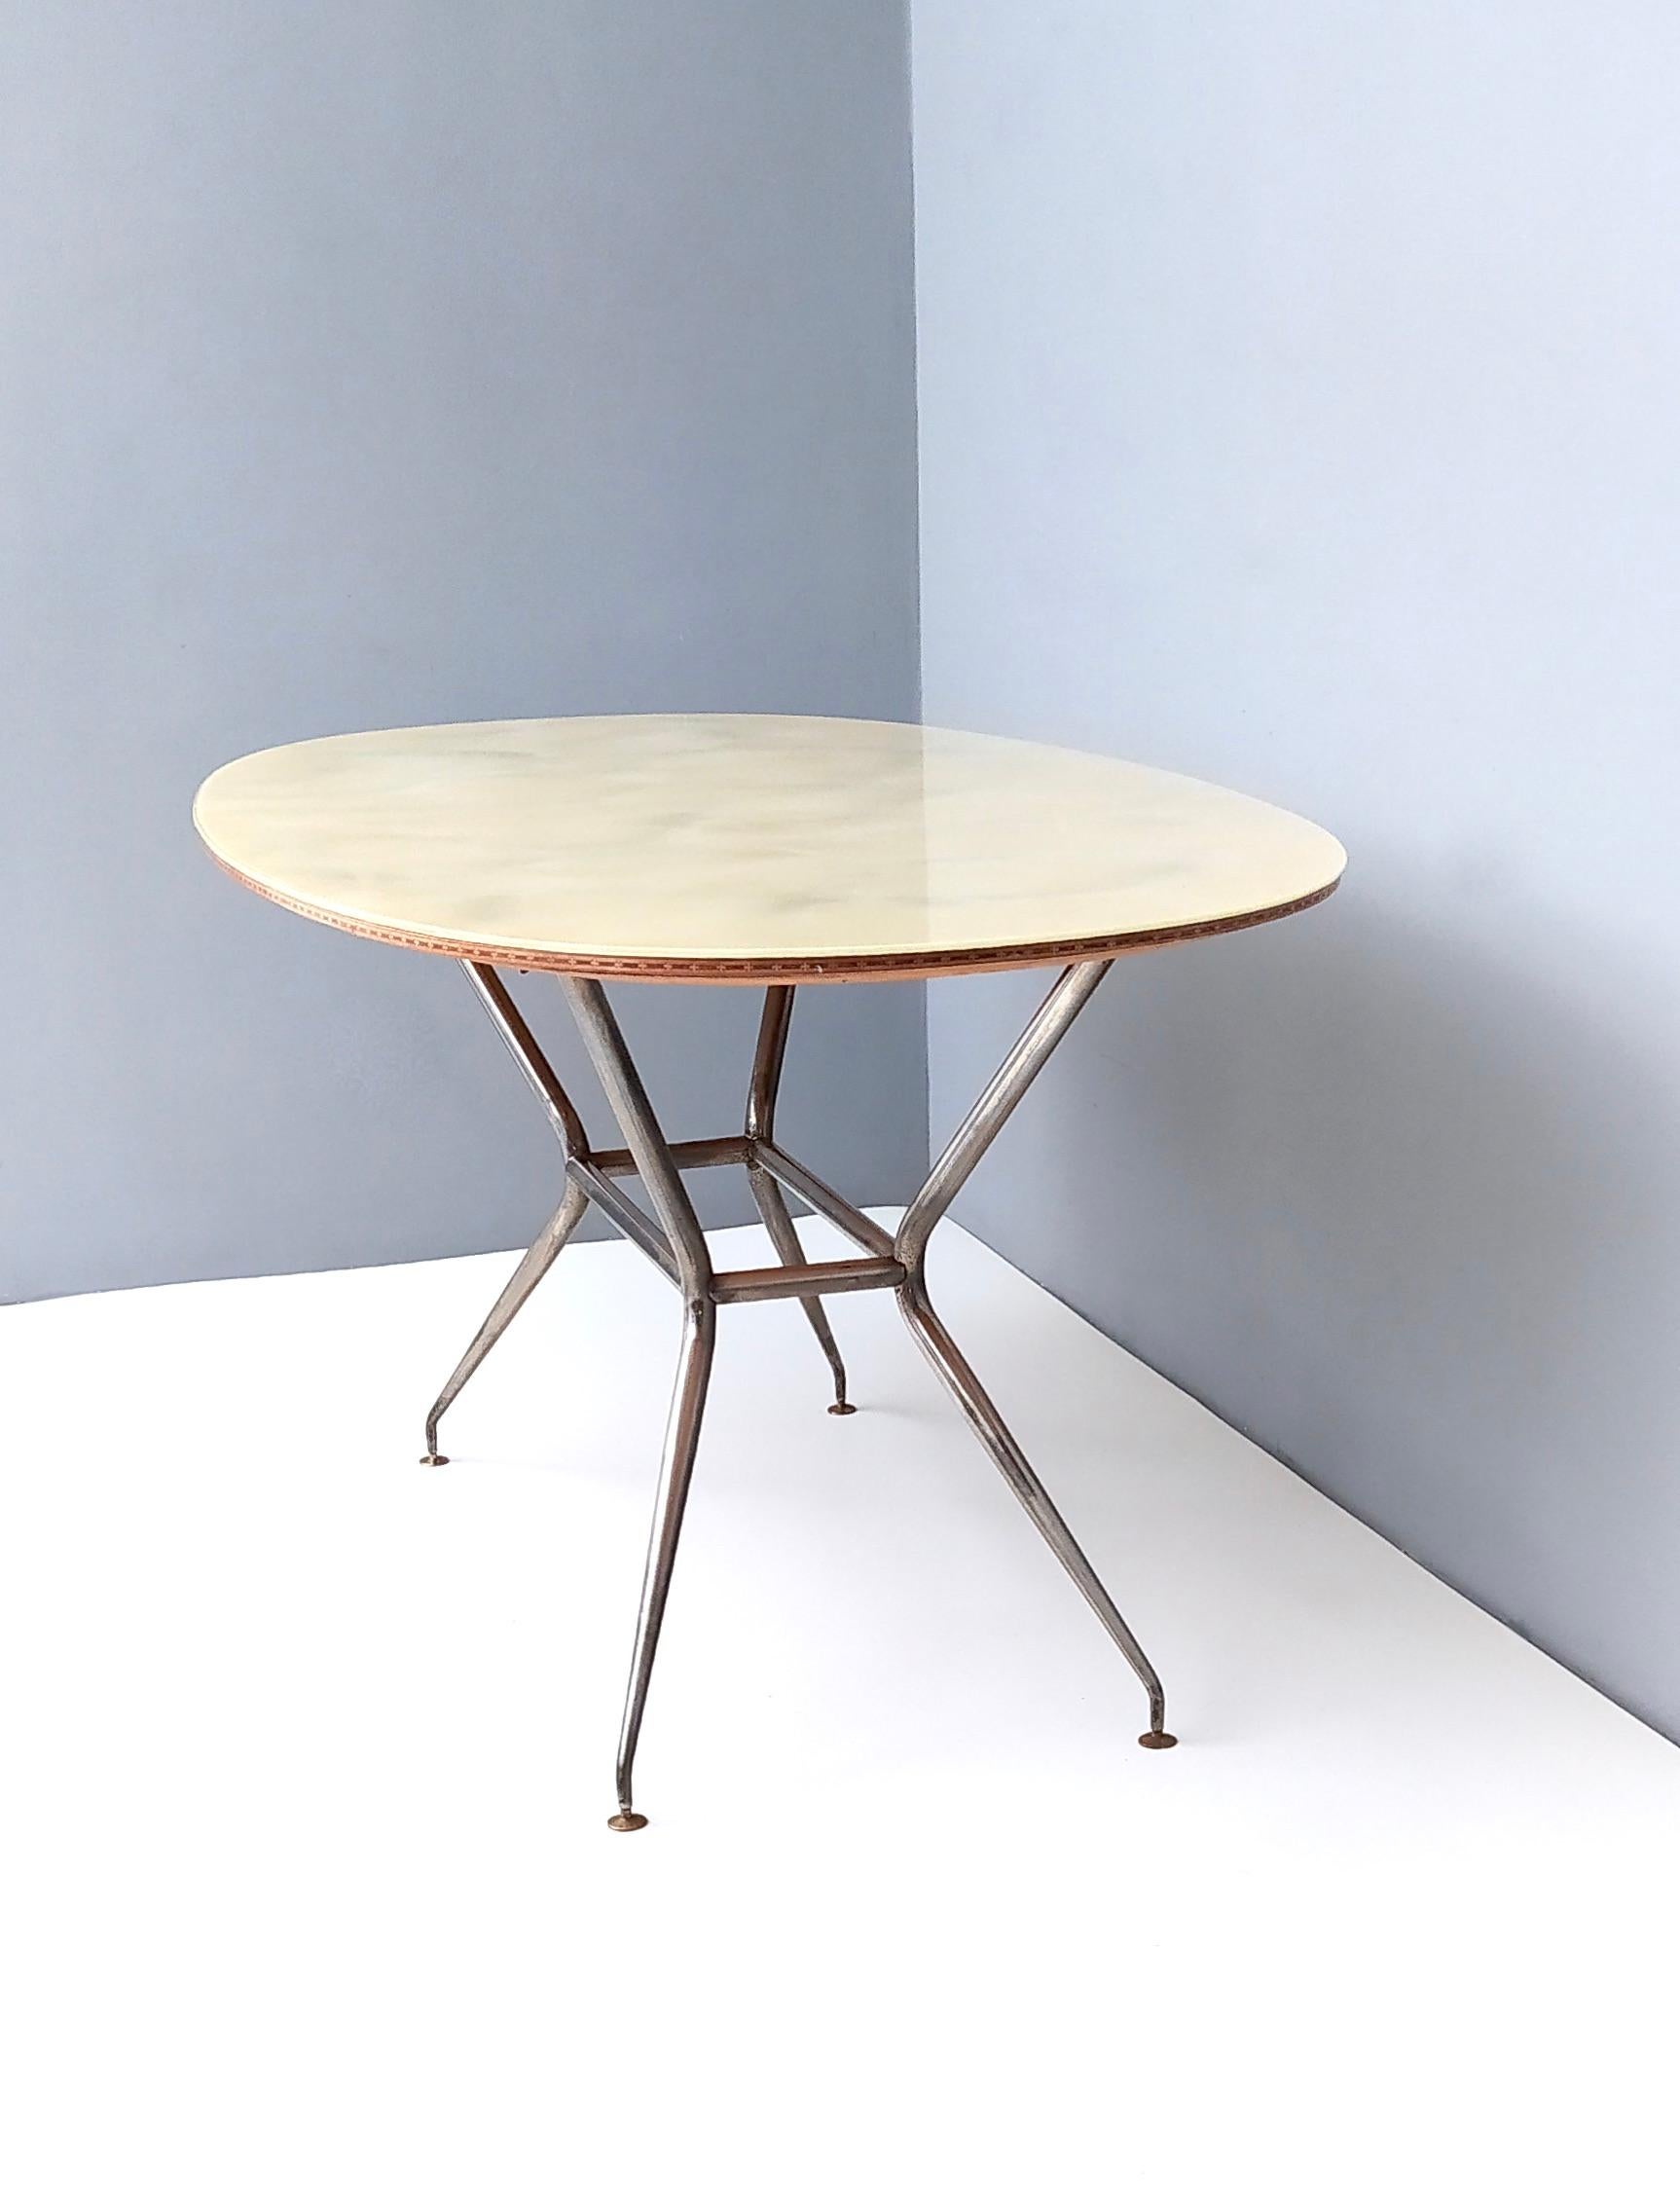 Mid-20th Century Vintage Wooden and Iron Dining Table with an Oval Glass Top, Italy